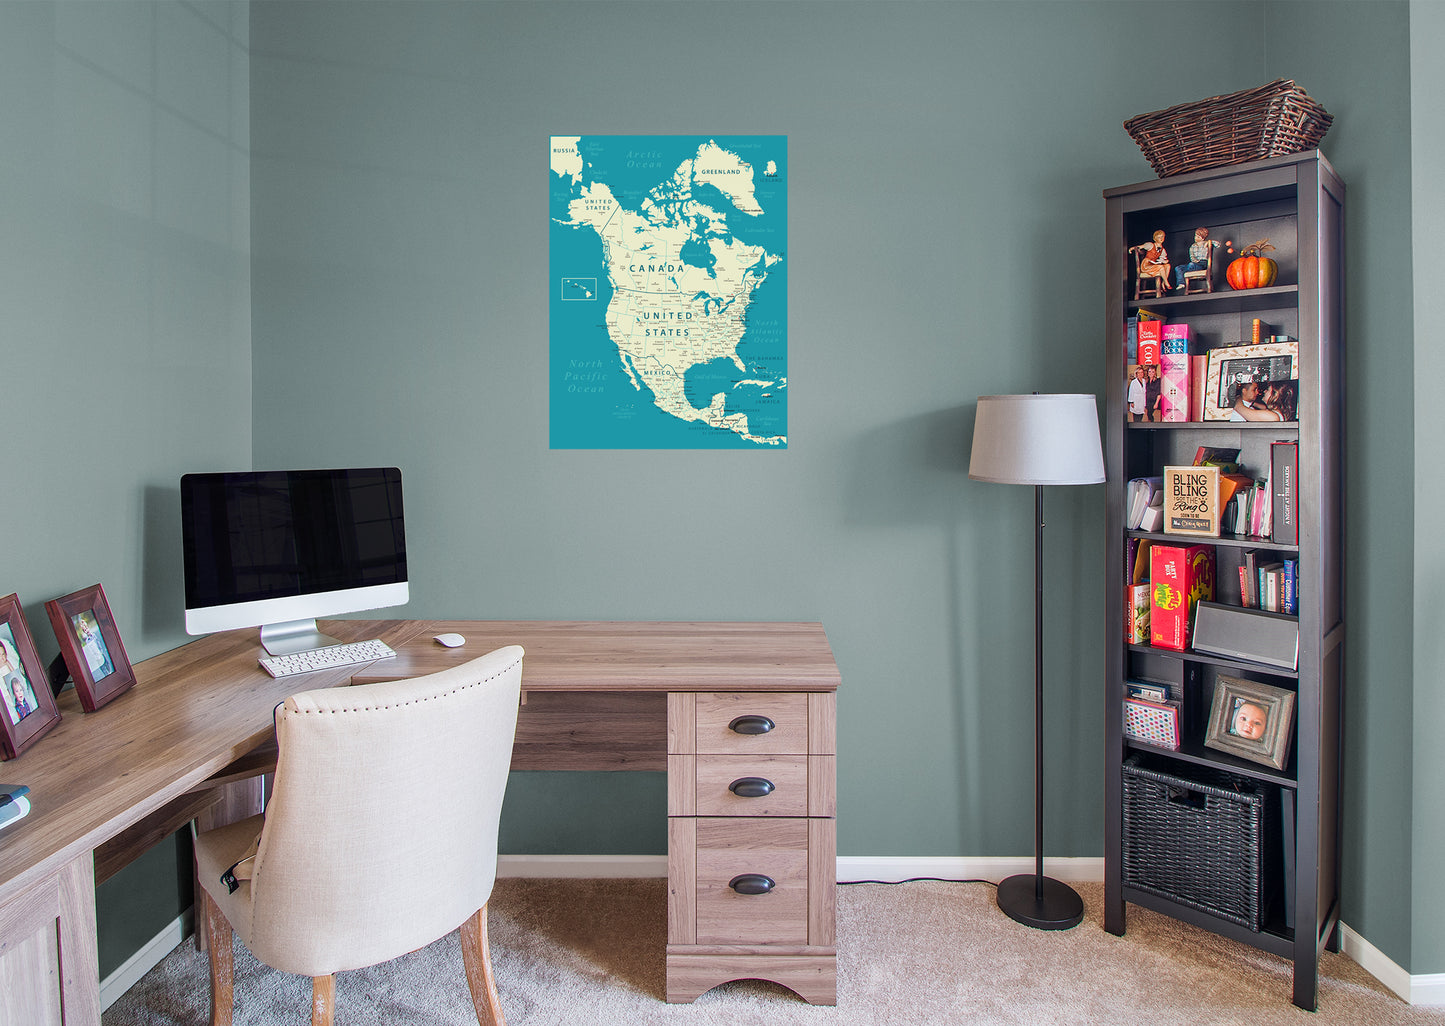 Maps: North America Vintage Blue Mural        -   Removable Wall   Adhesive Decal